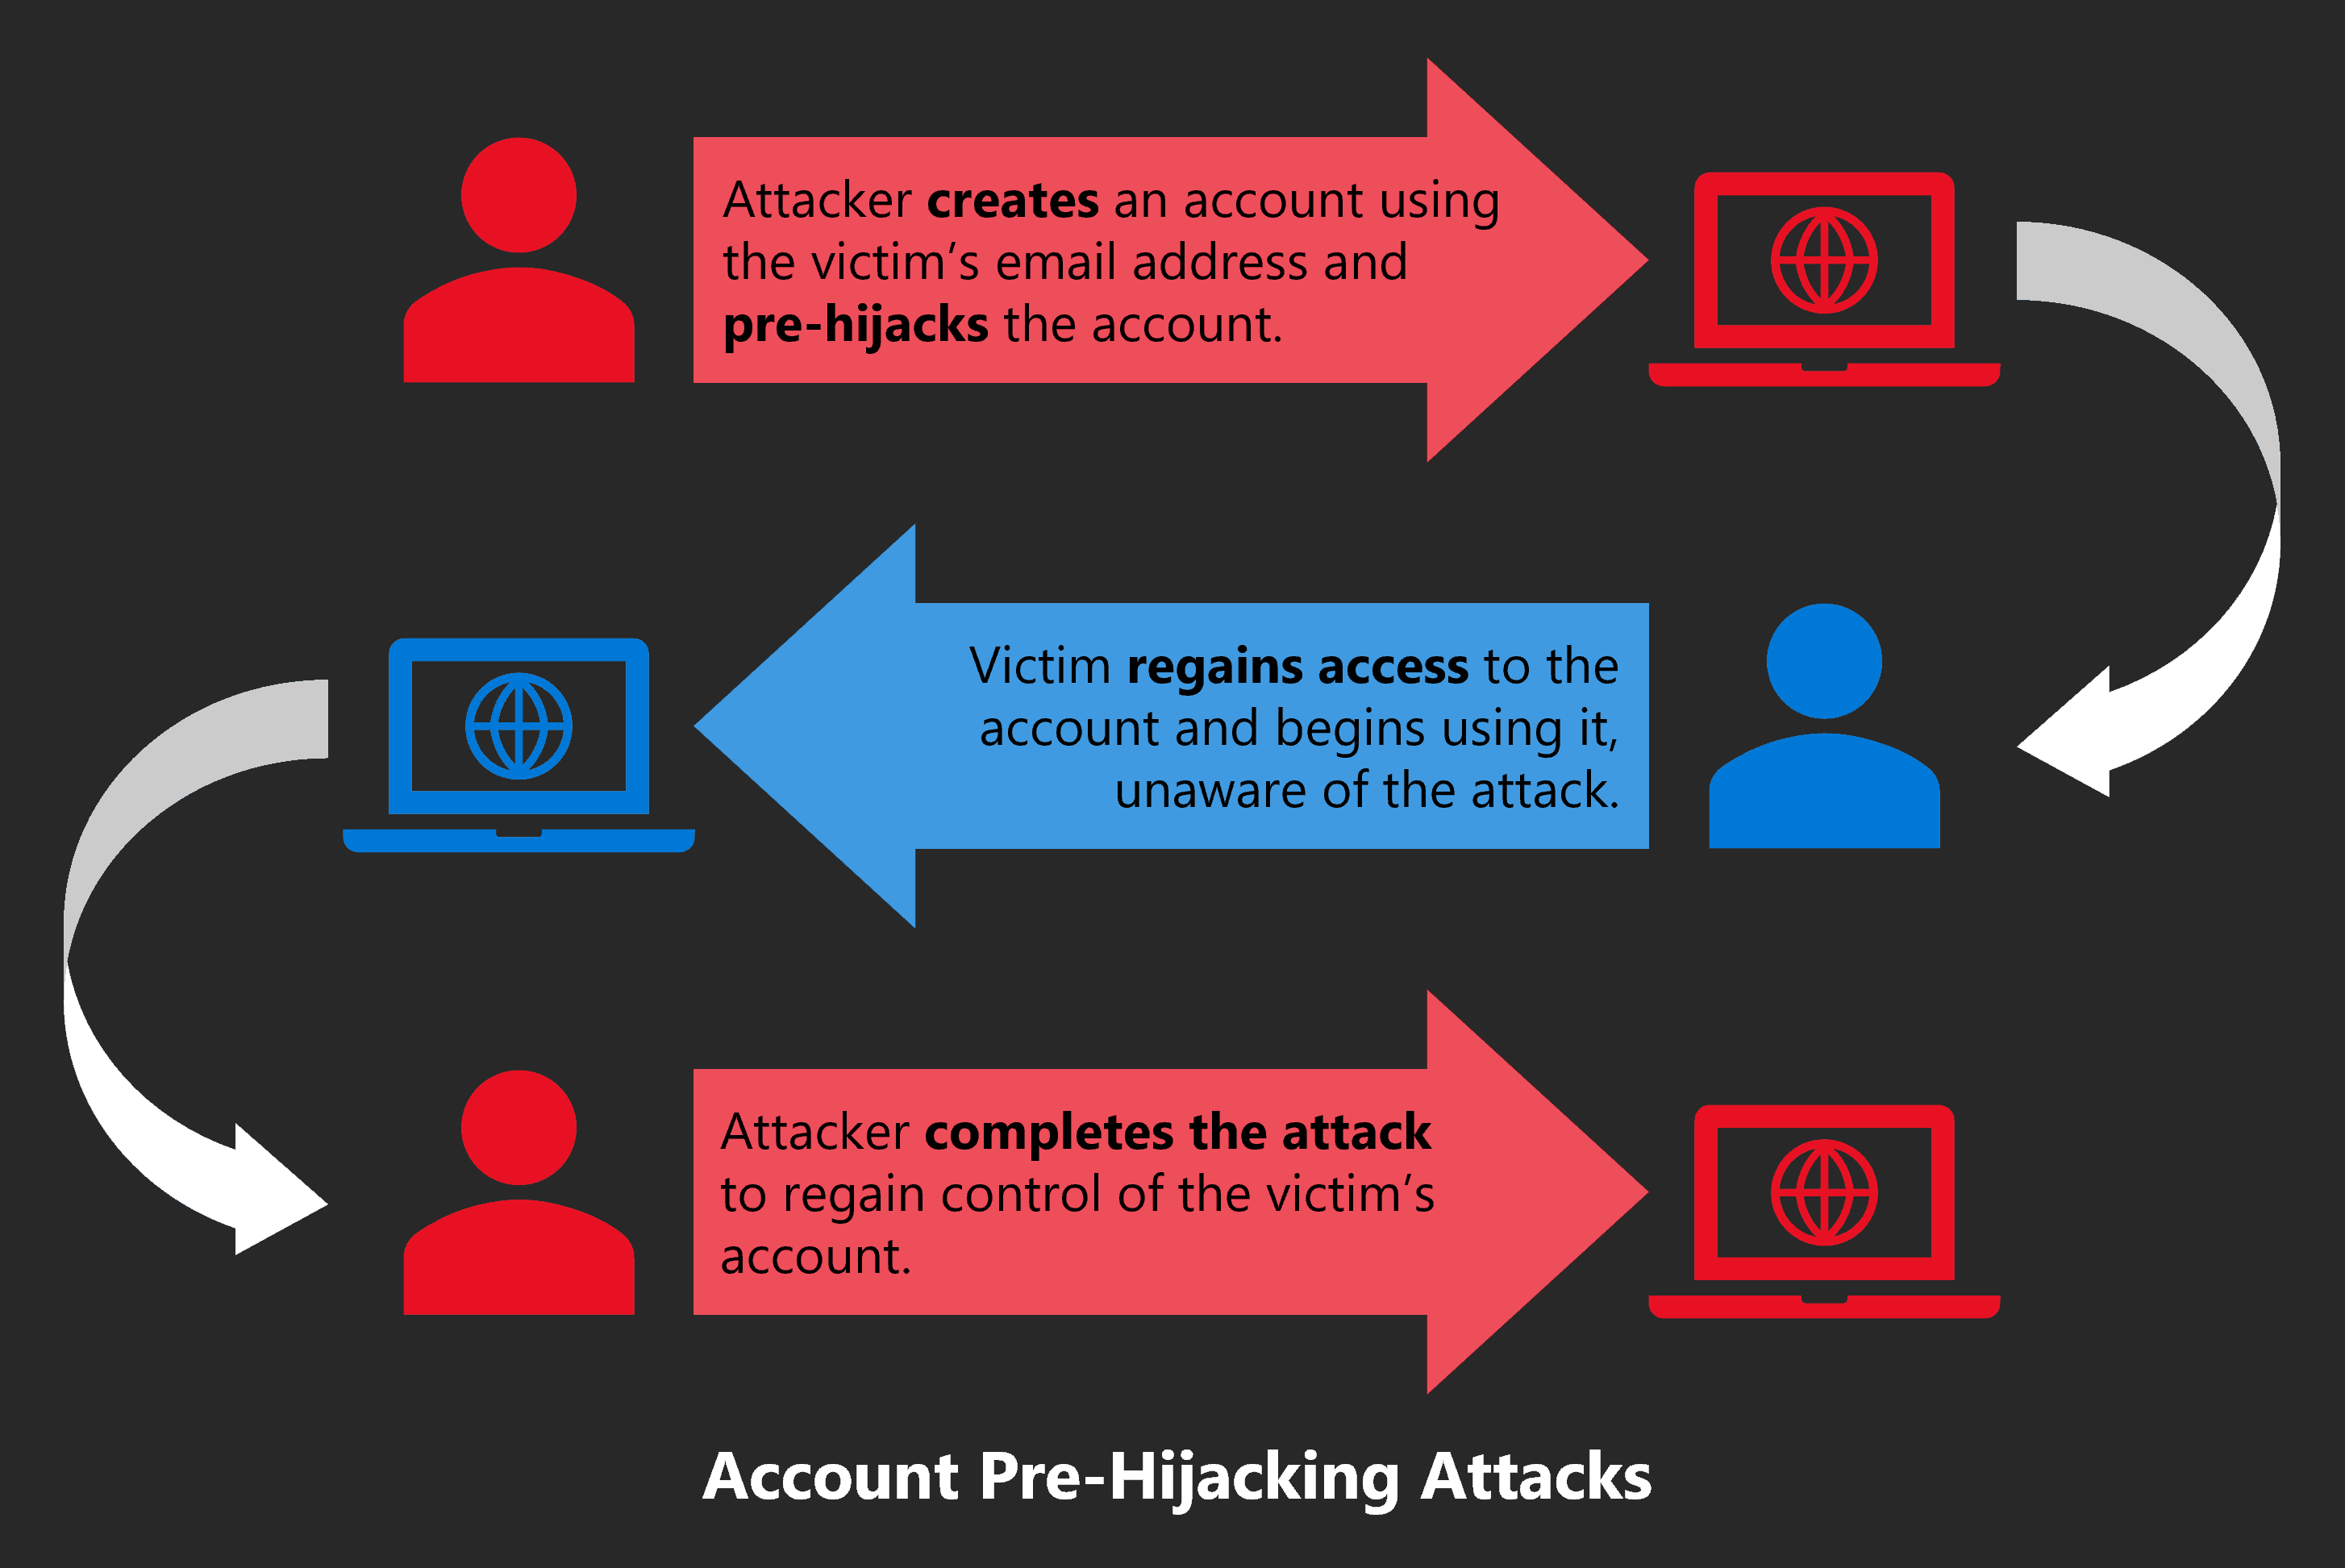 Pre-hijacking Attacks of user accounts are on the rise